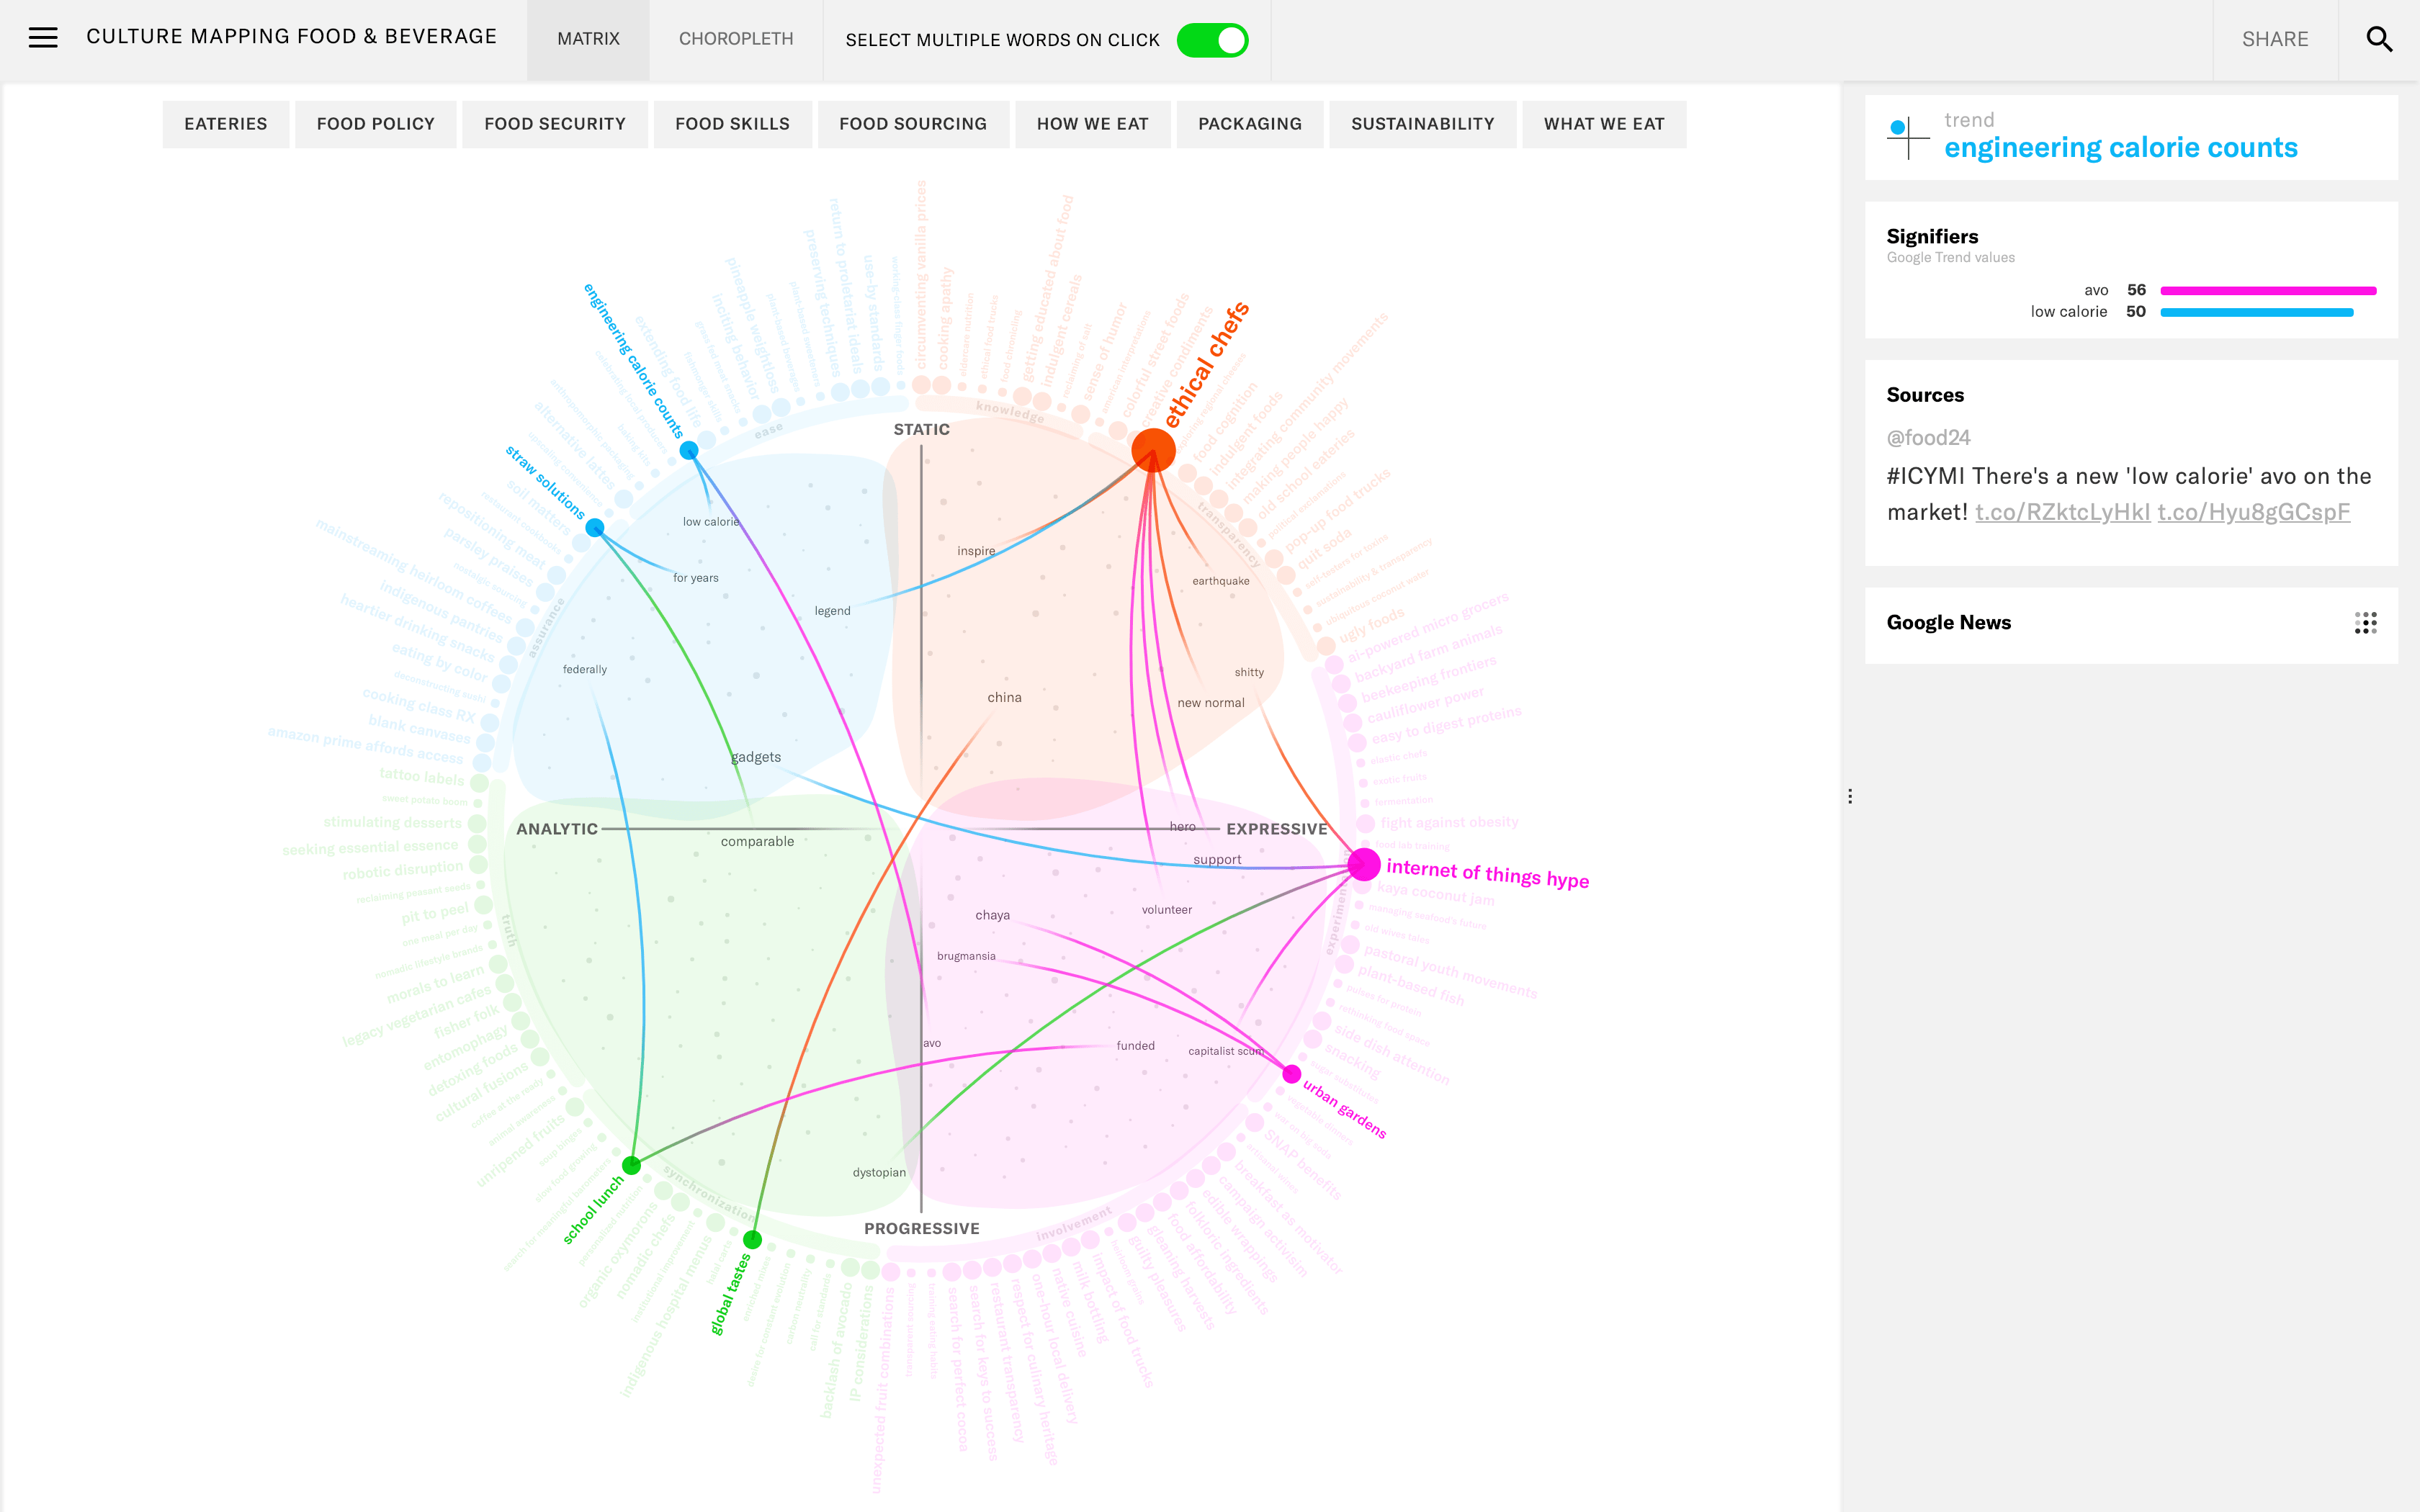 You can select multiple trends to see their inner connections and possible overlaps